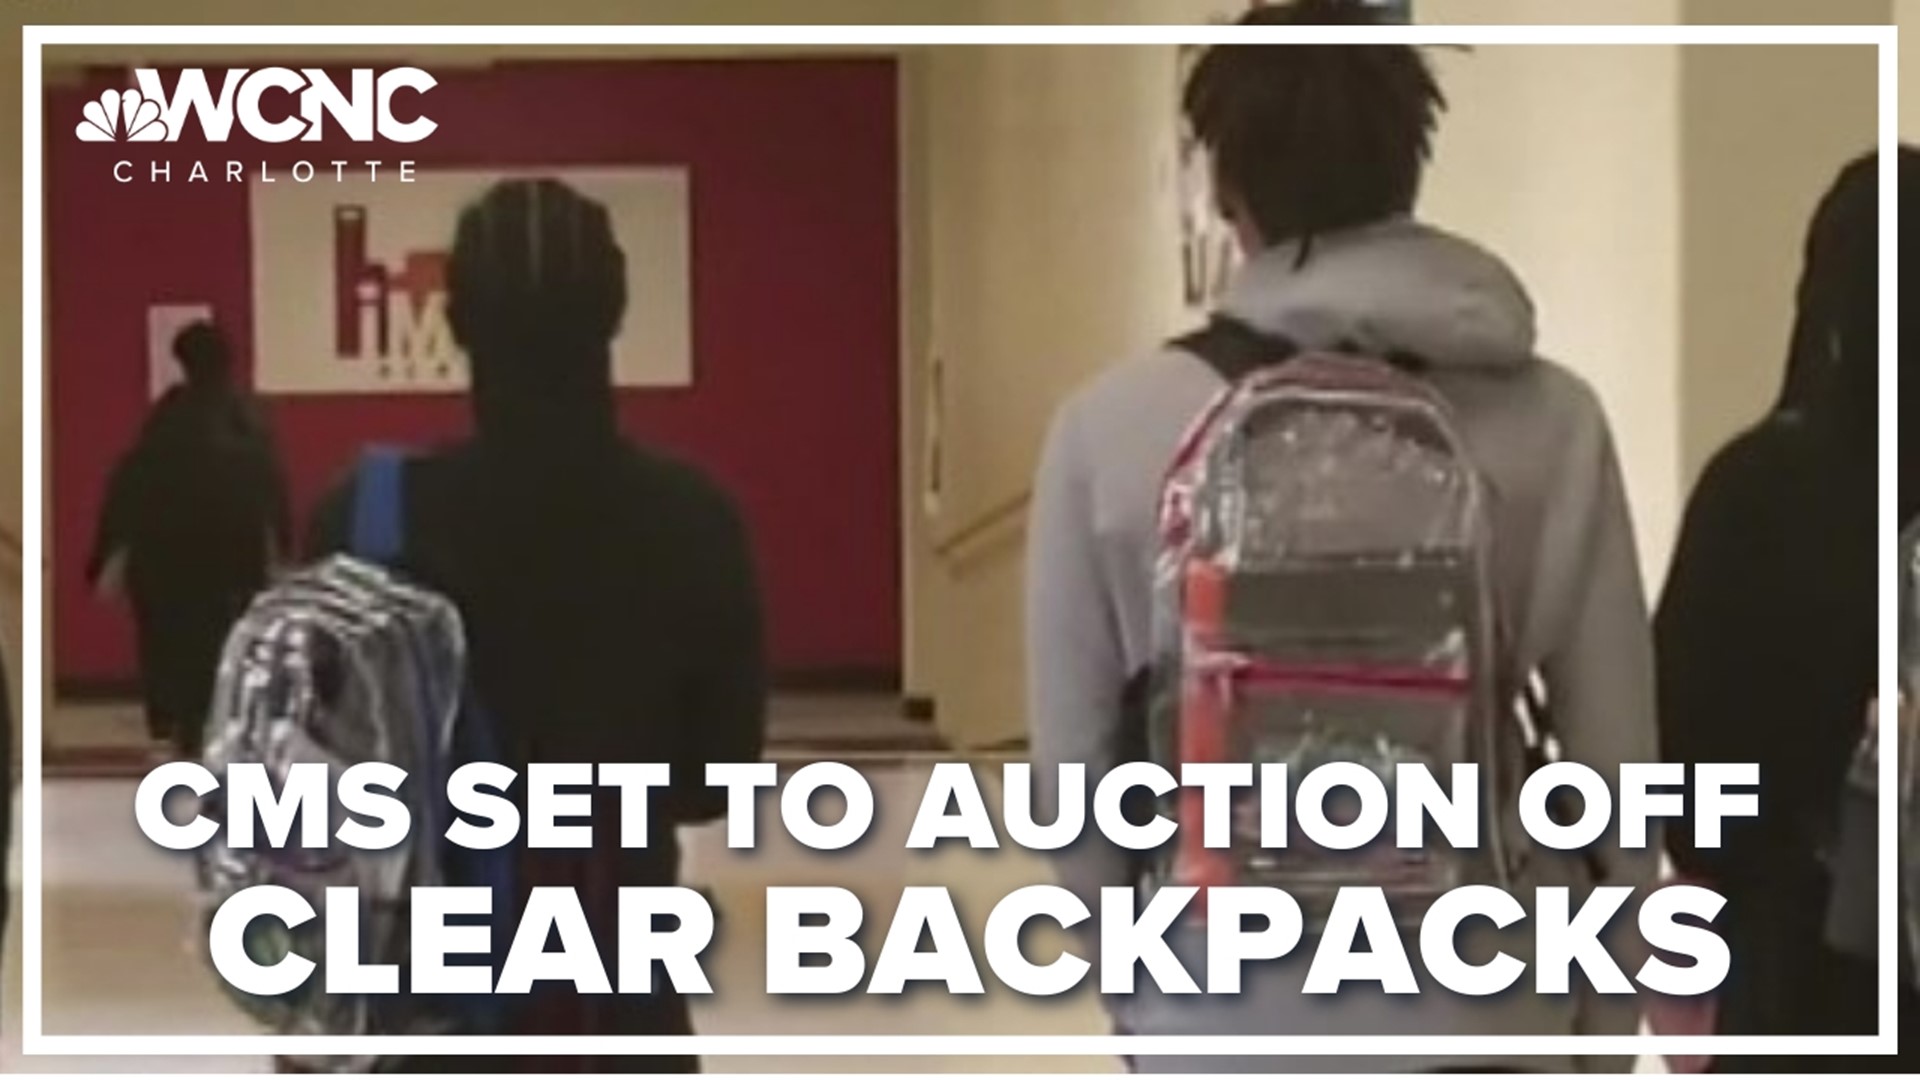 The meeting agenda suggests that the thousands of clear backpacks will be auctioned off online.